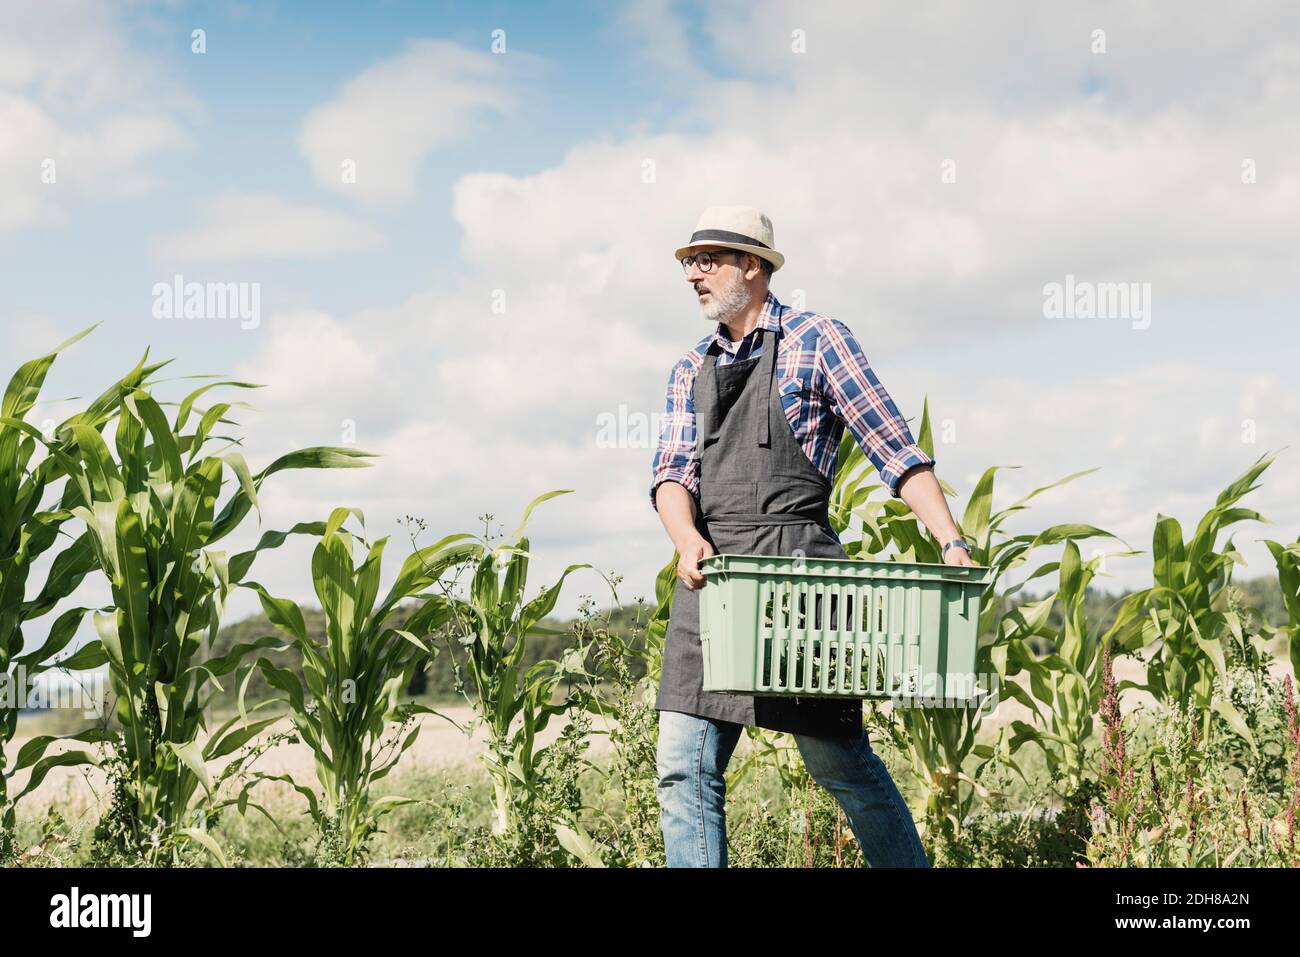 Low angle view of mature gardener carrying crate at farm against sky Stock Photo